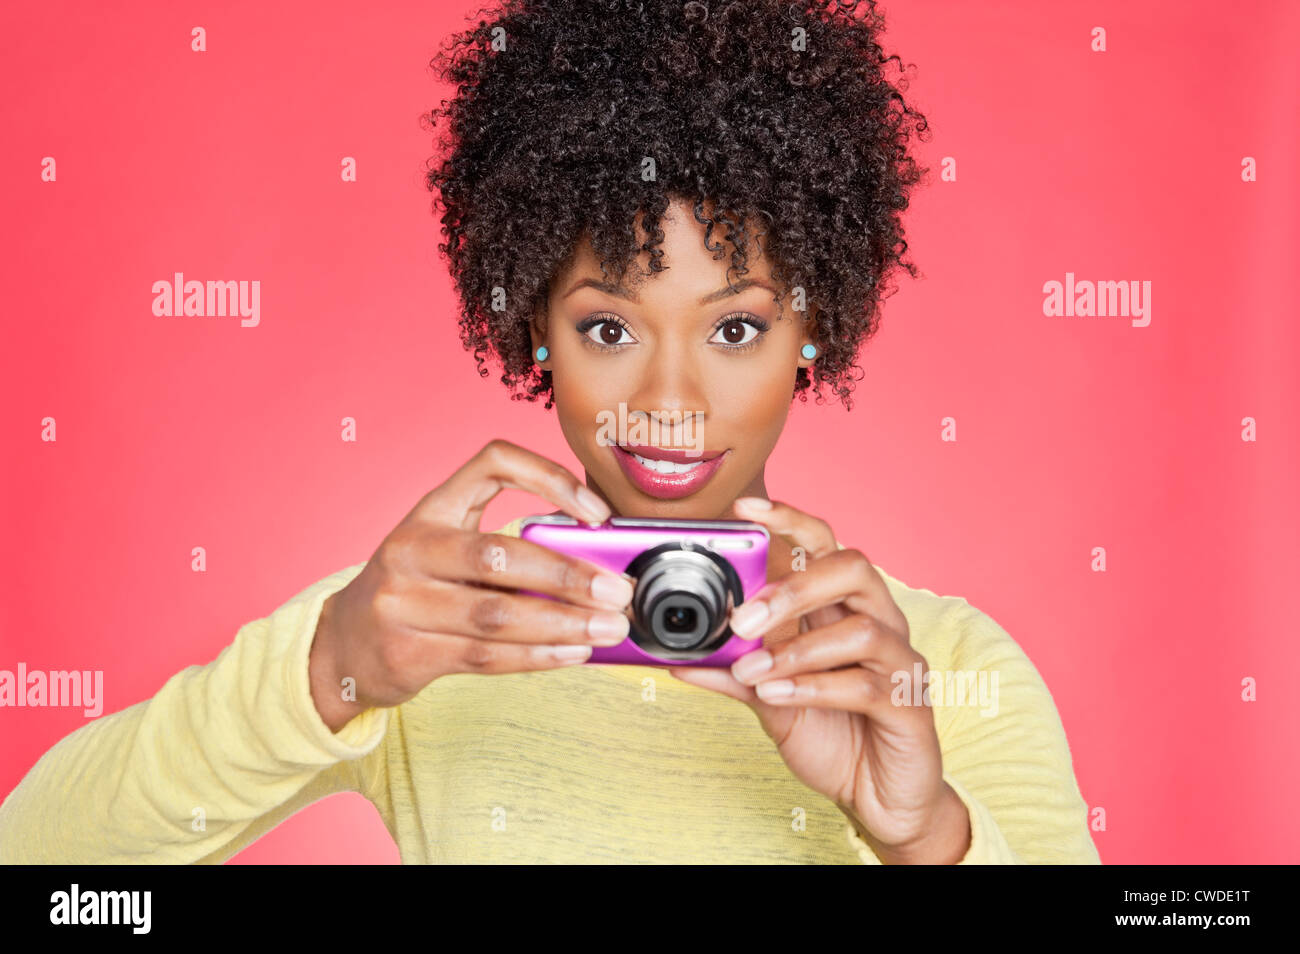 Portrait of an African American woman holding a camera over colored background Stock Photo